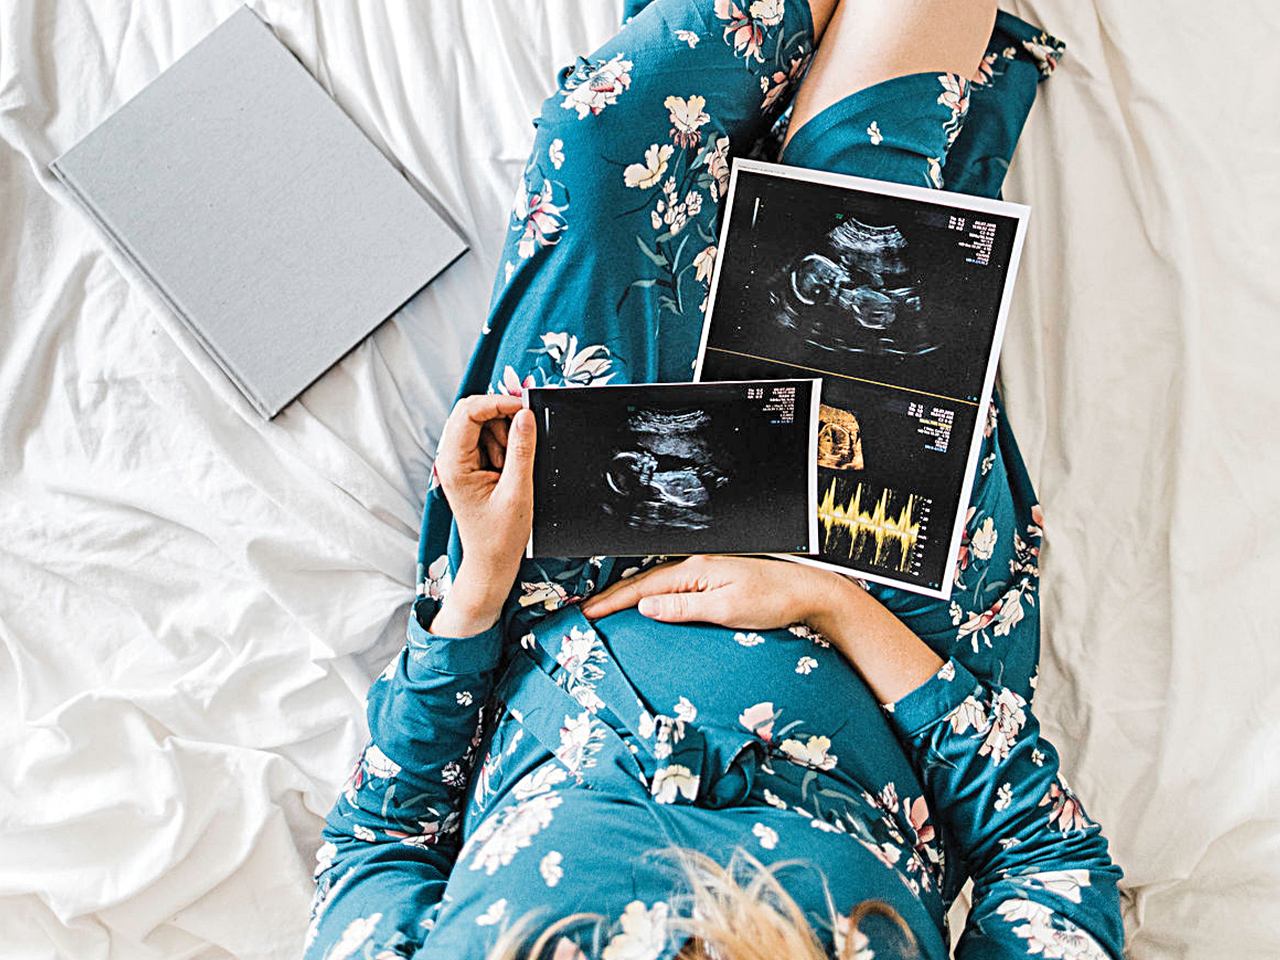 How many ultrasounds do you get in a typical pregnancy?